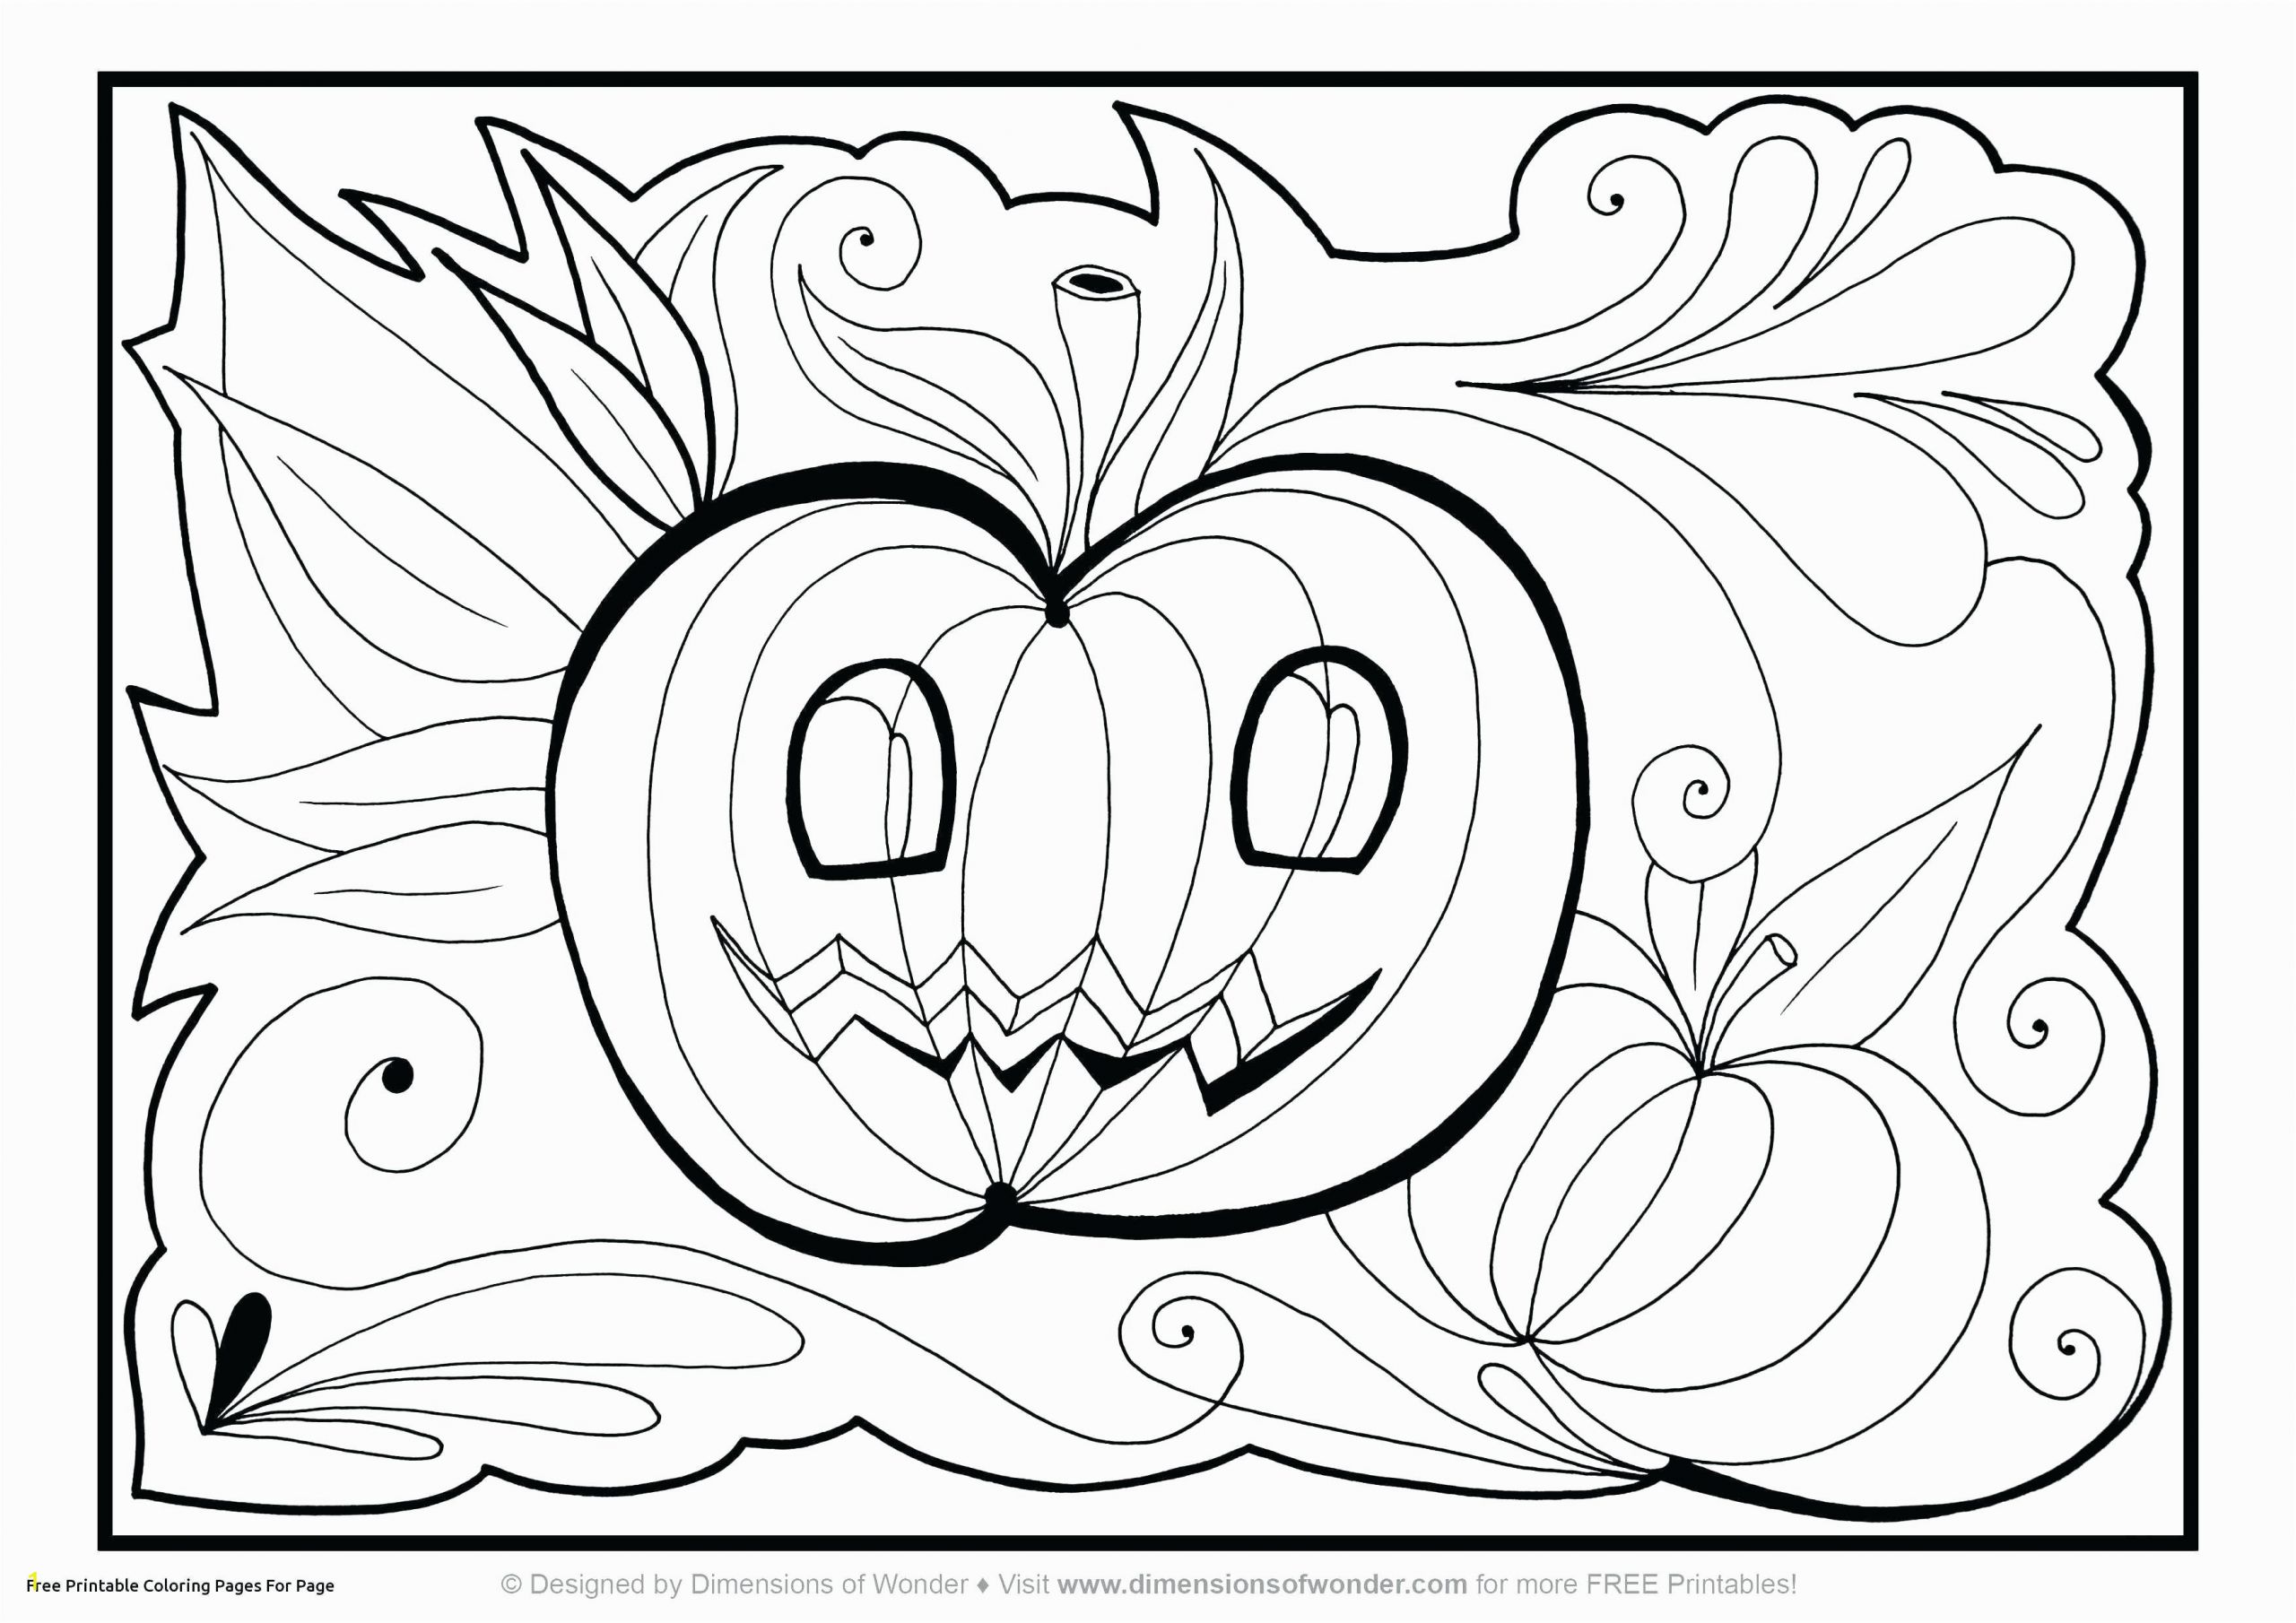 printable thanksgiving coloring pages aesthetic tayo large print books brandy and mr whiskers sports themed for teens mini mushroom book realistic bird adult colouring